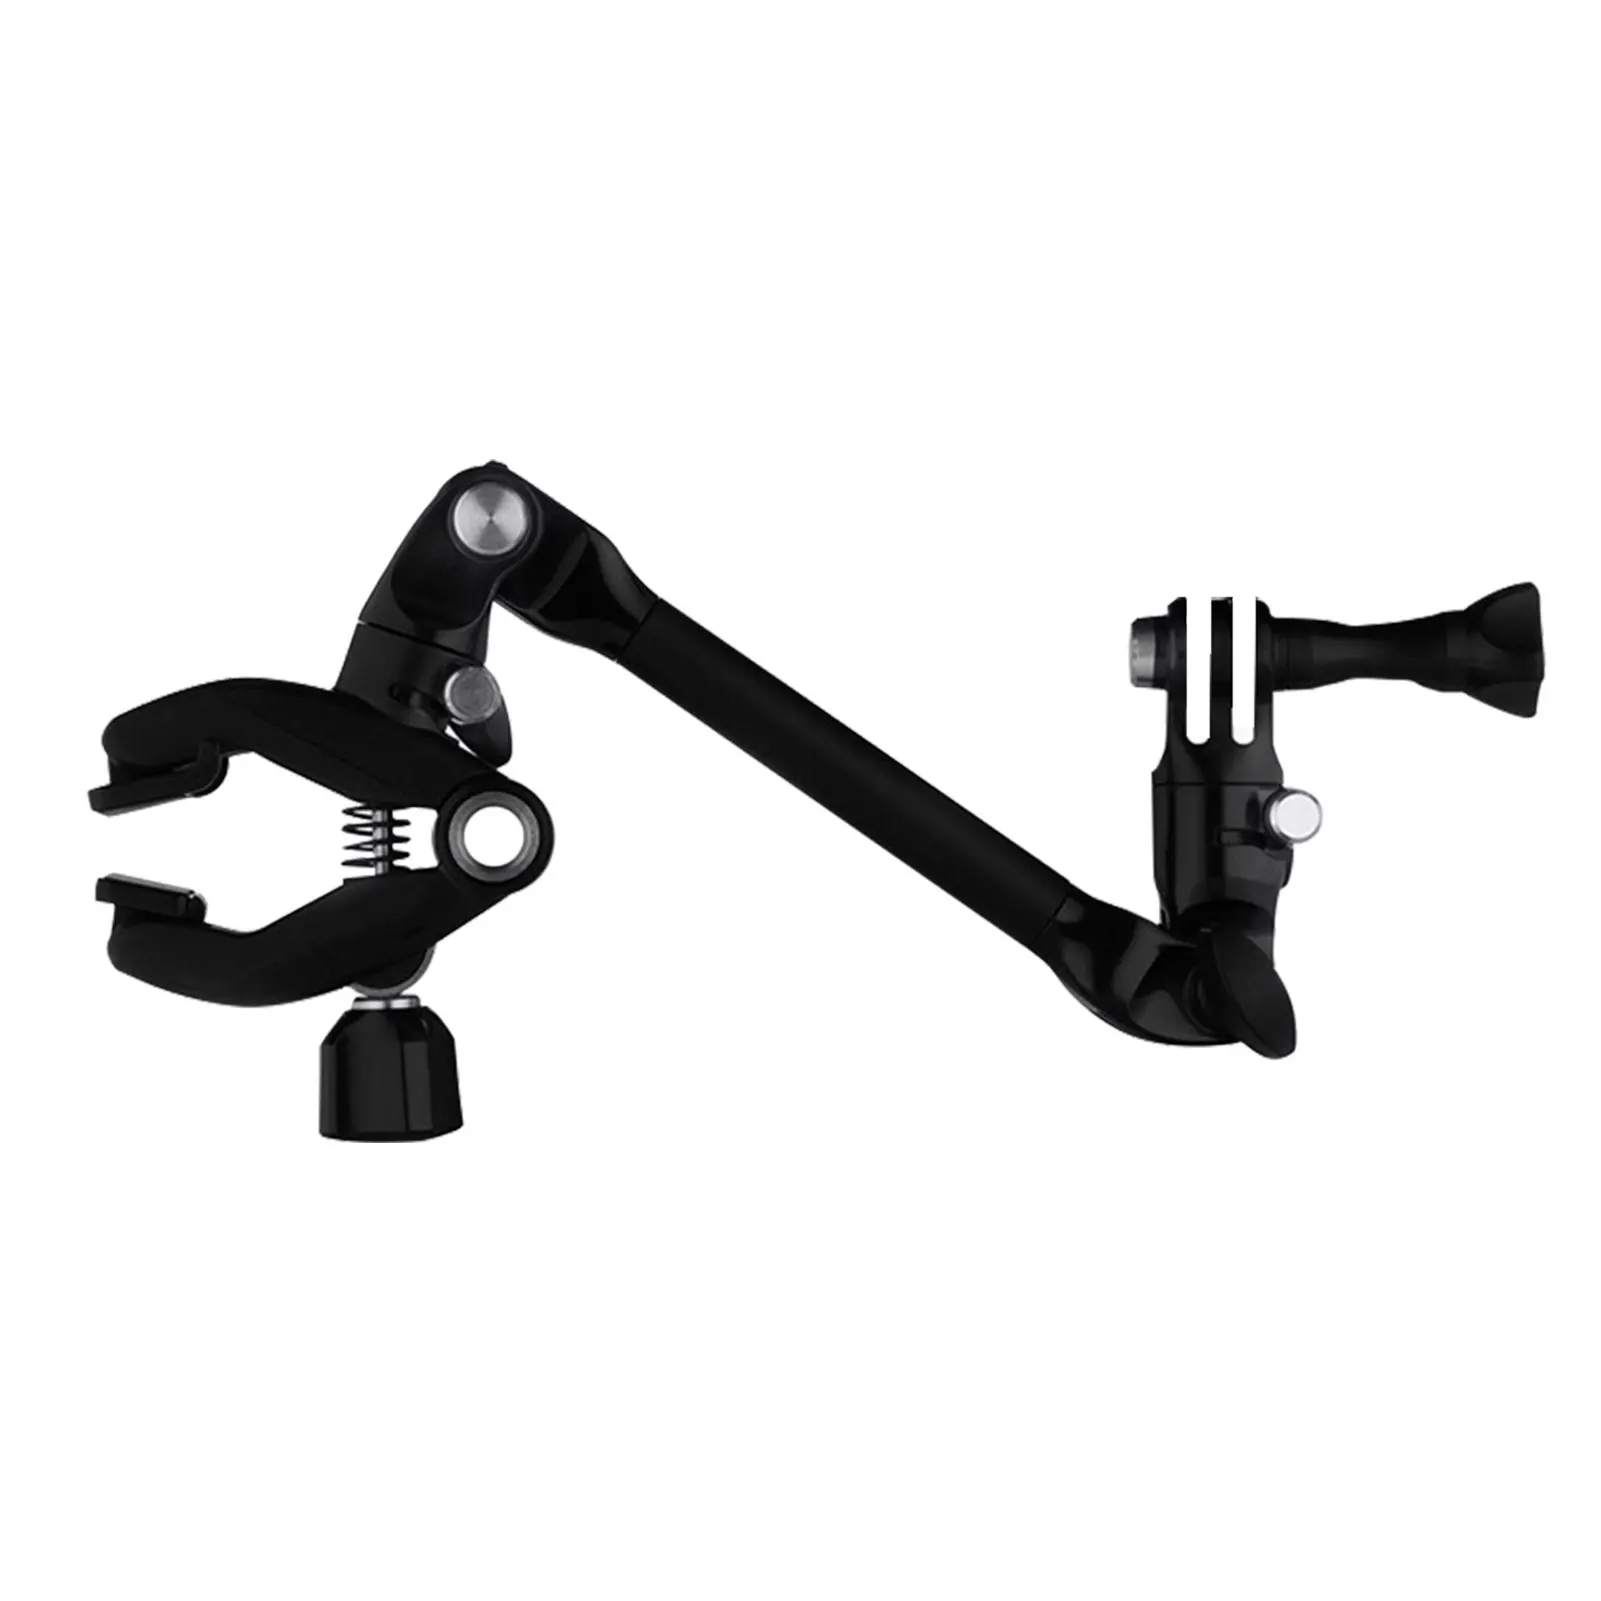 

Camera Clamp 360 Rotation Desk Clip Mount Bracket Support Easy Install Flexible Adjustable Arm Holder Accessories Fit For GoPro